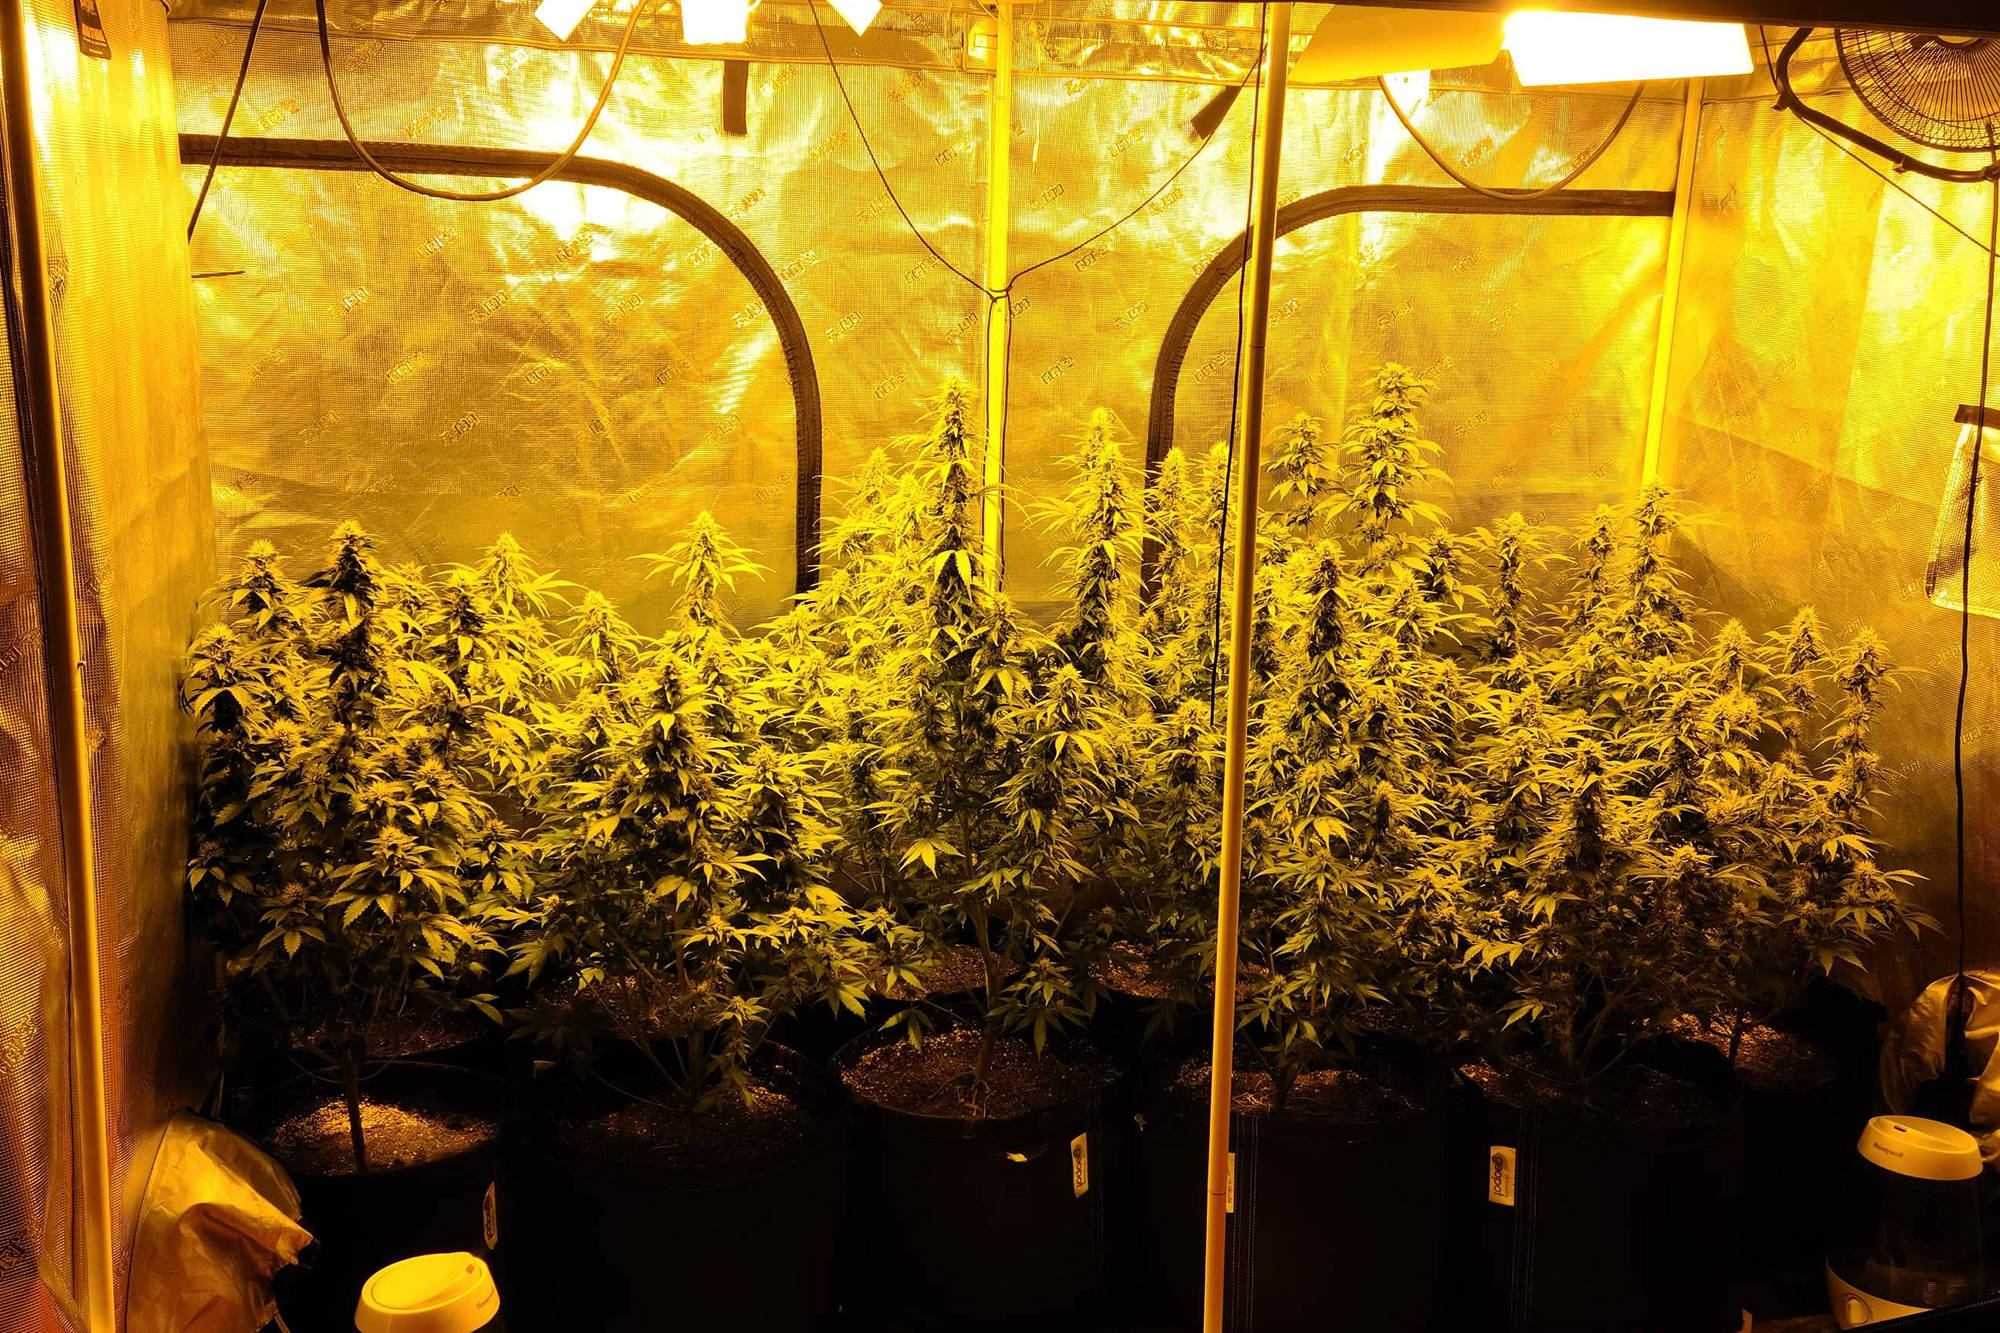 David and Laura Wilkinson’s medical cannabis is grown in self-contained vented tent systems in their basement. (Contributed)